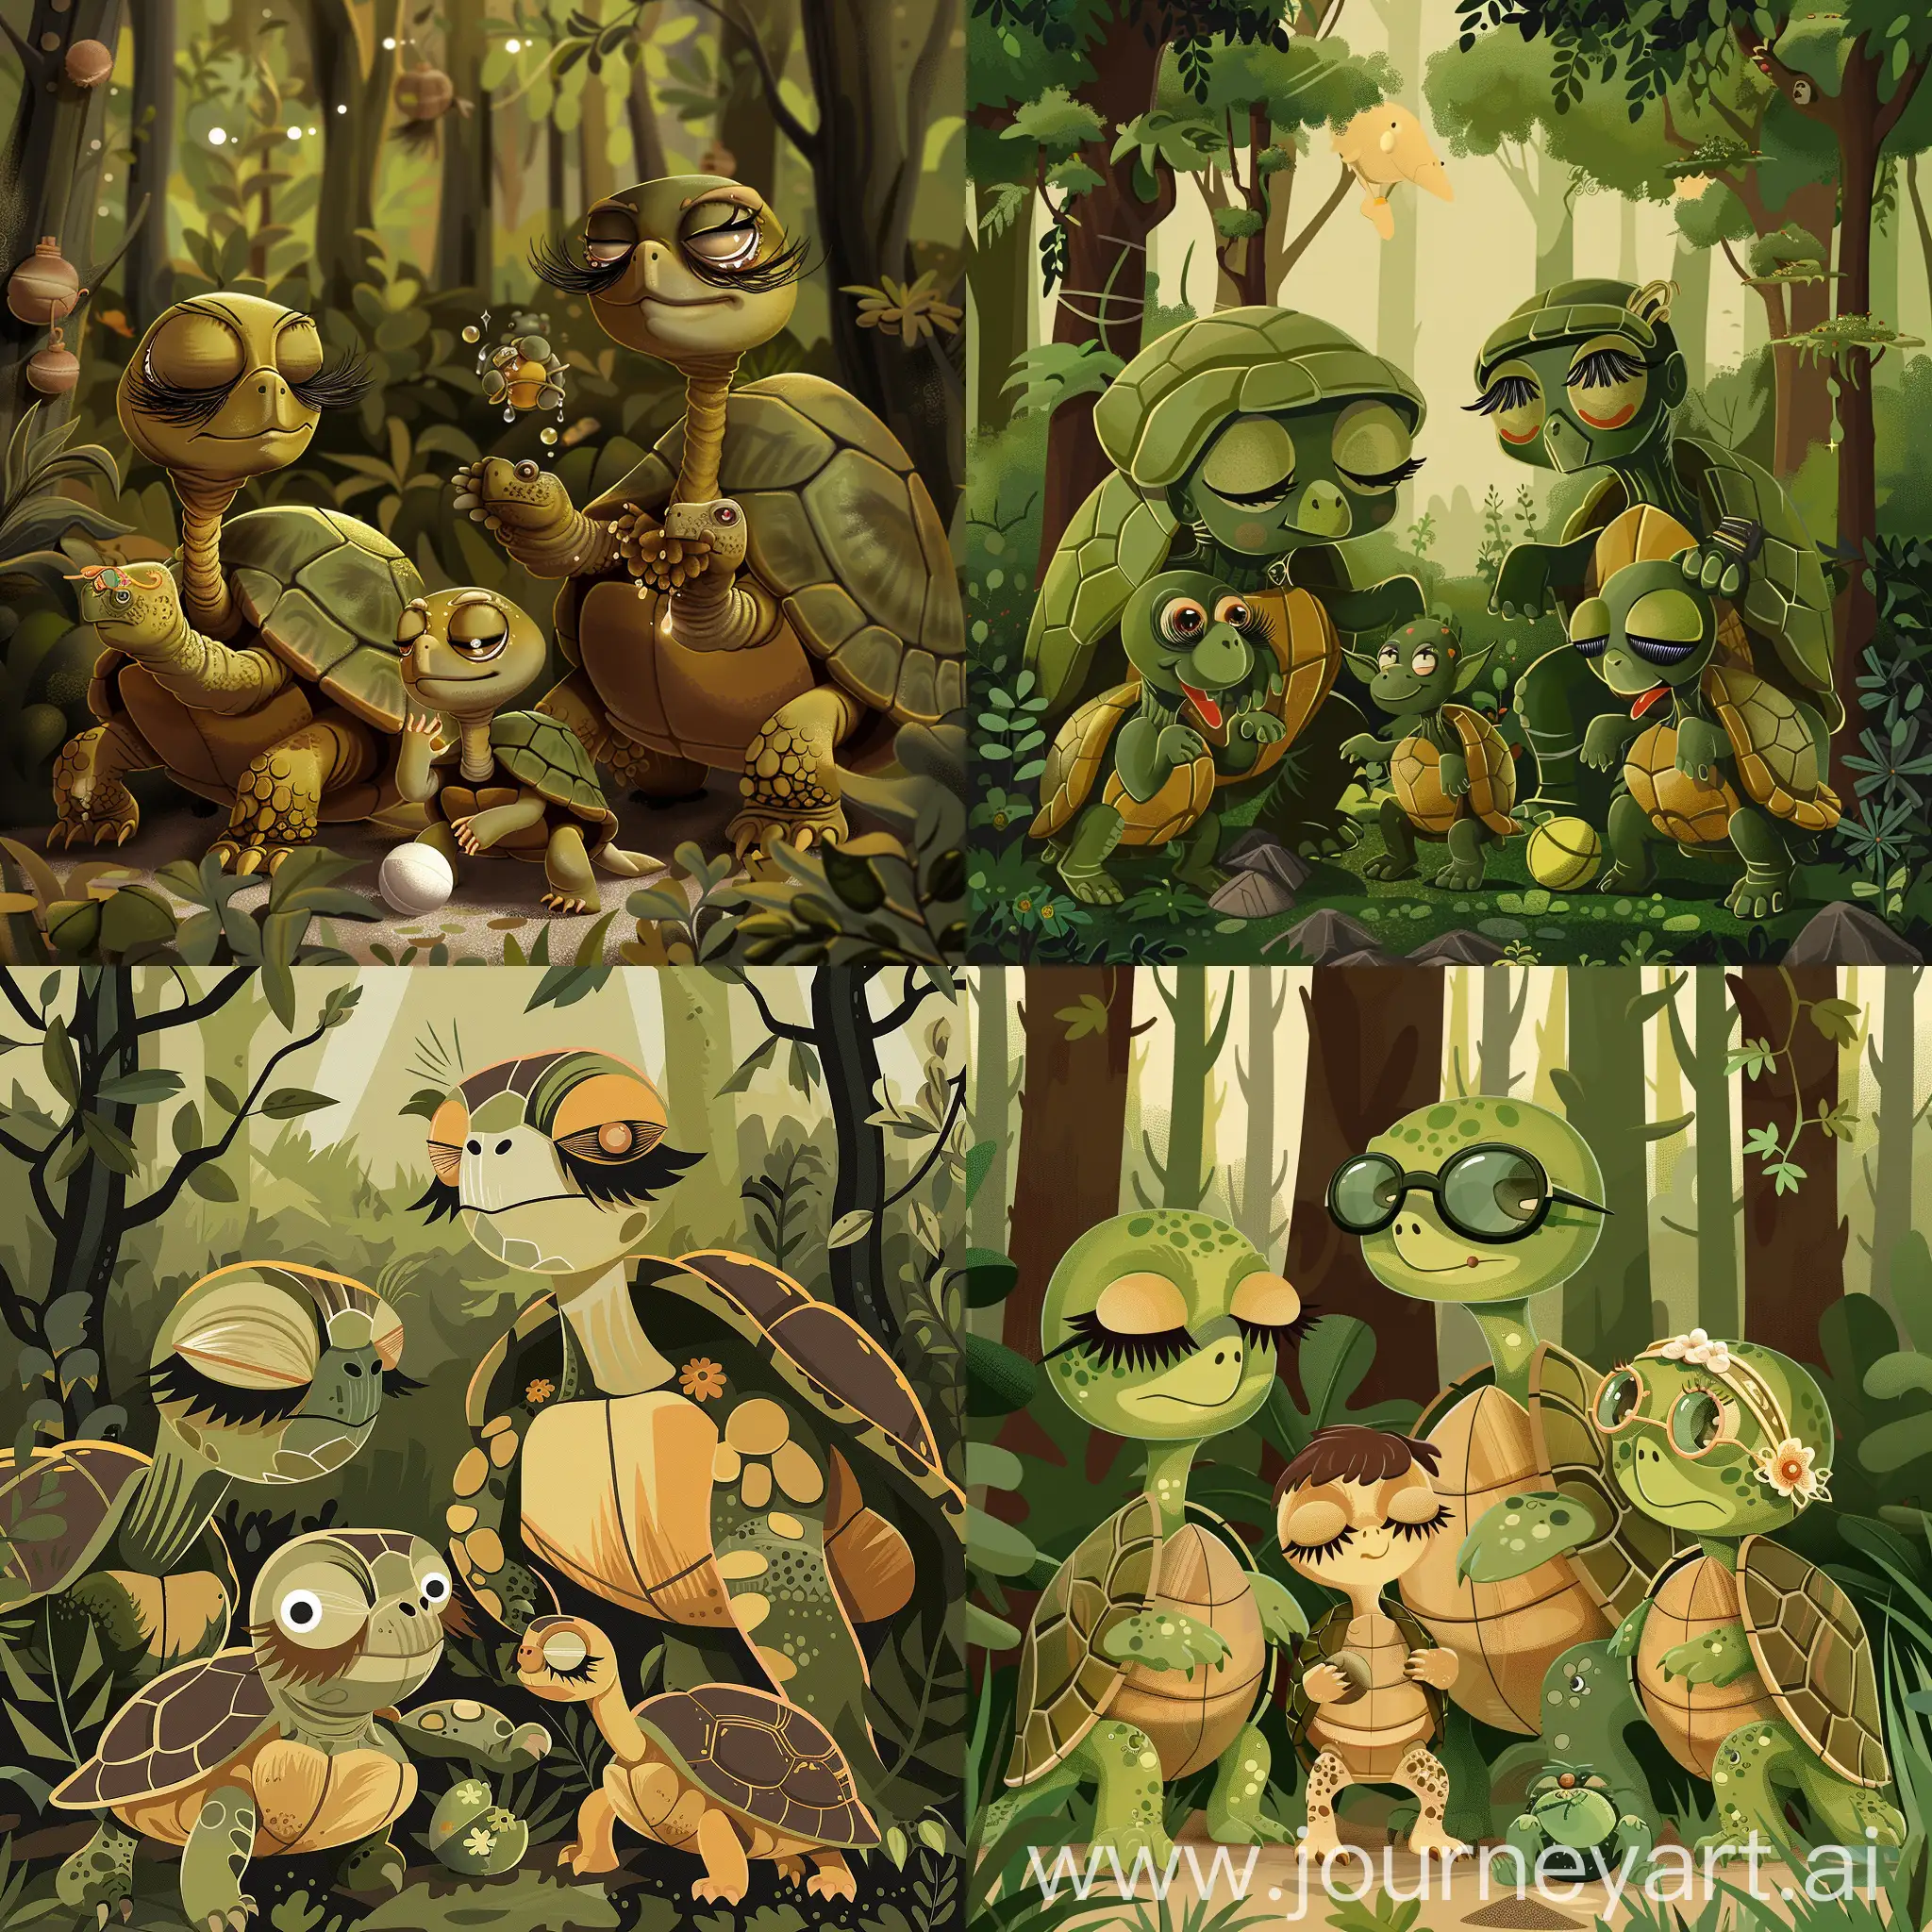 Enchanted-Forest-Family-of-Four-Turtles-with-Unique-Features